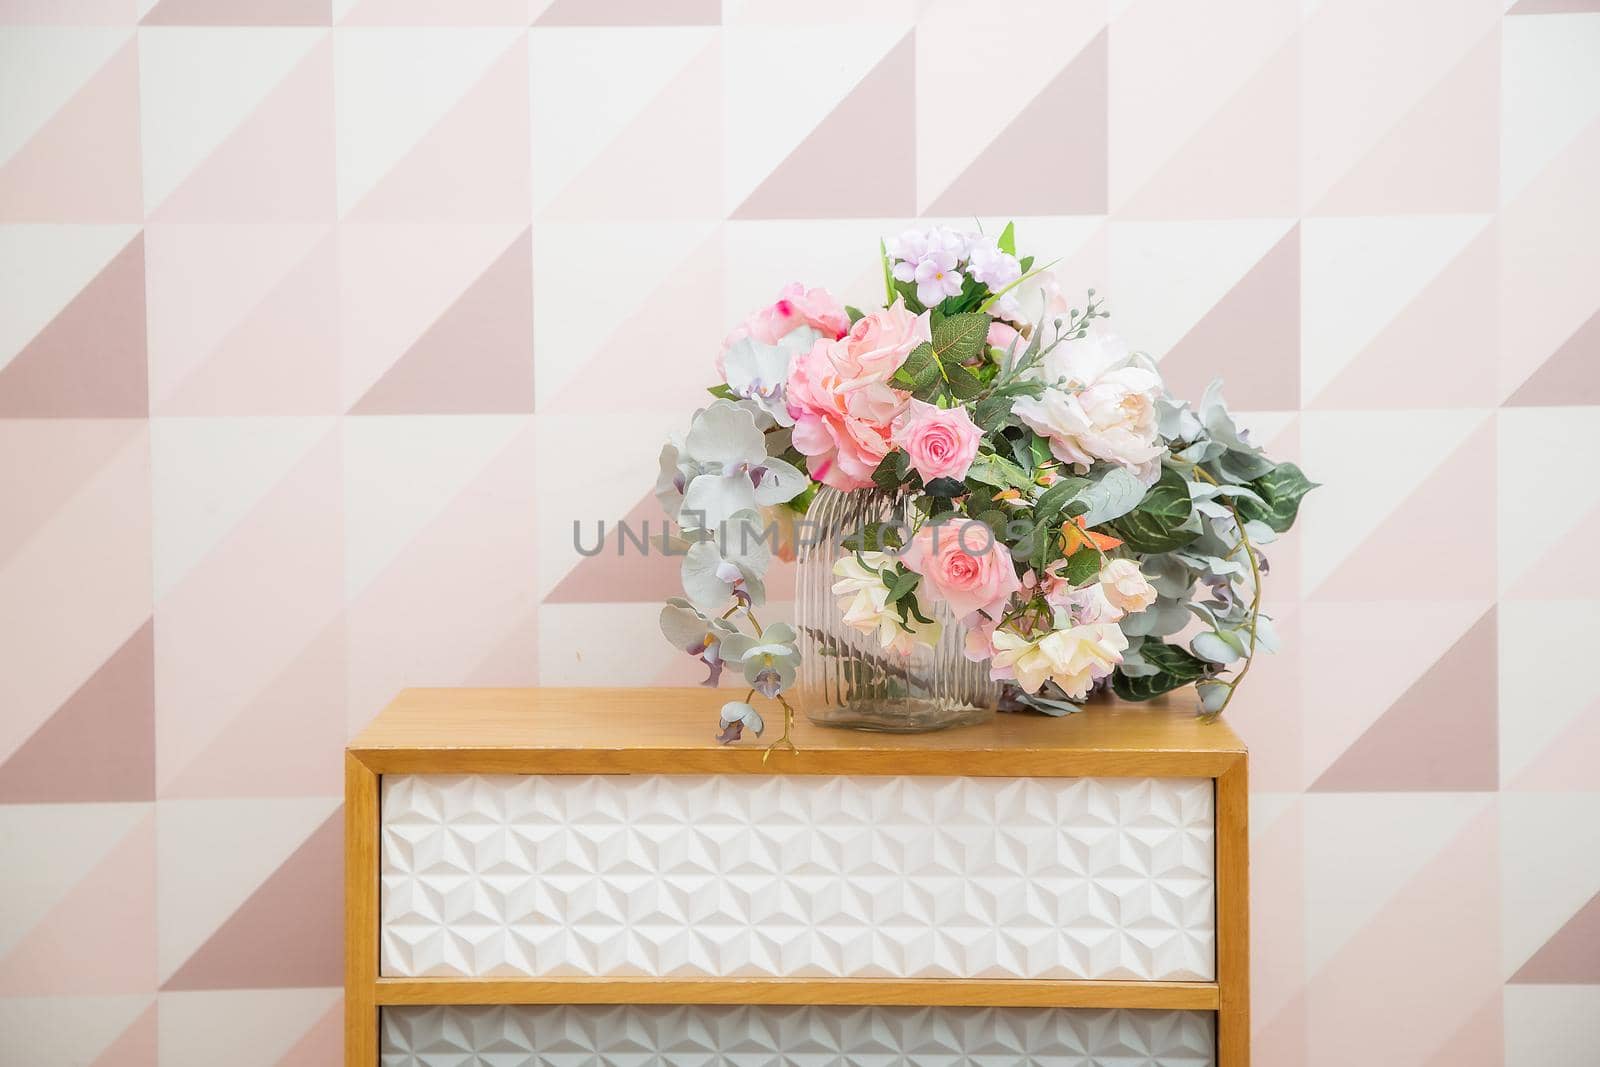 A vase of flowers on a chest of drawers near the wall with a geometric pattern by galinasharapova